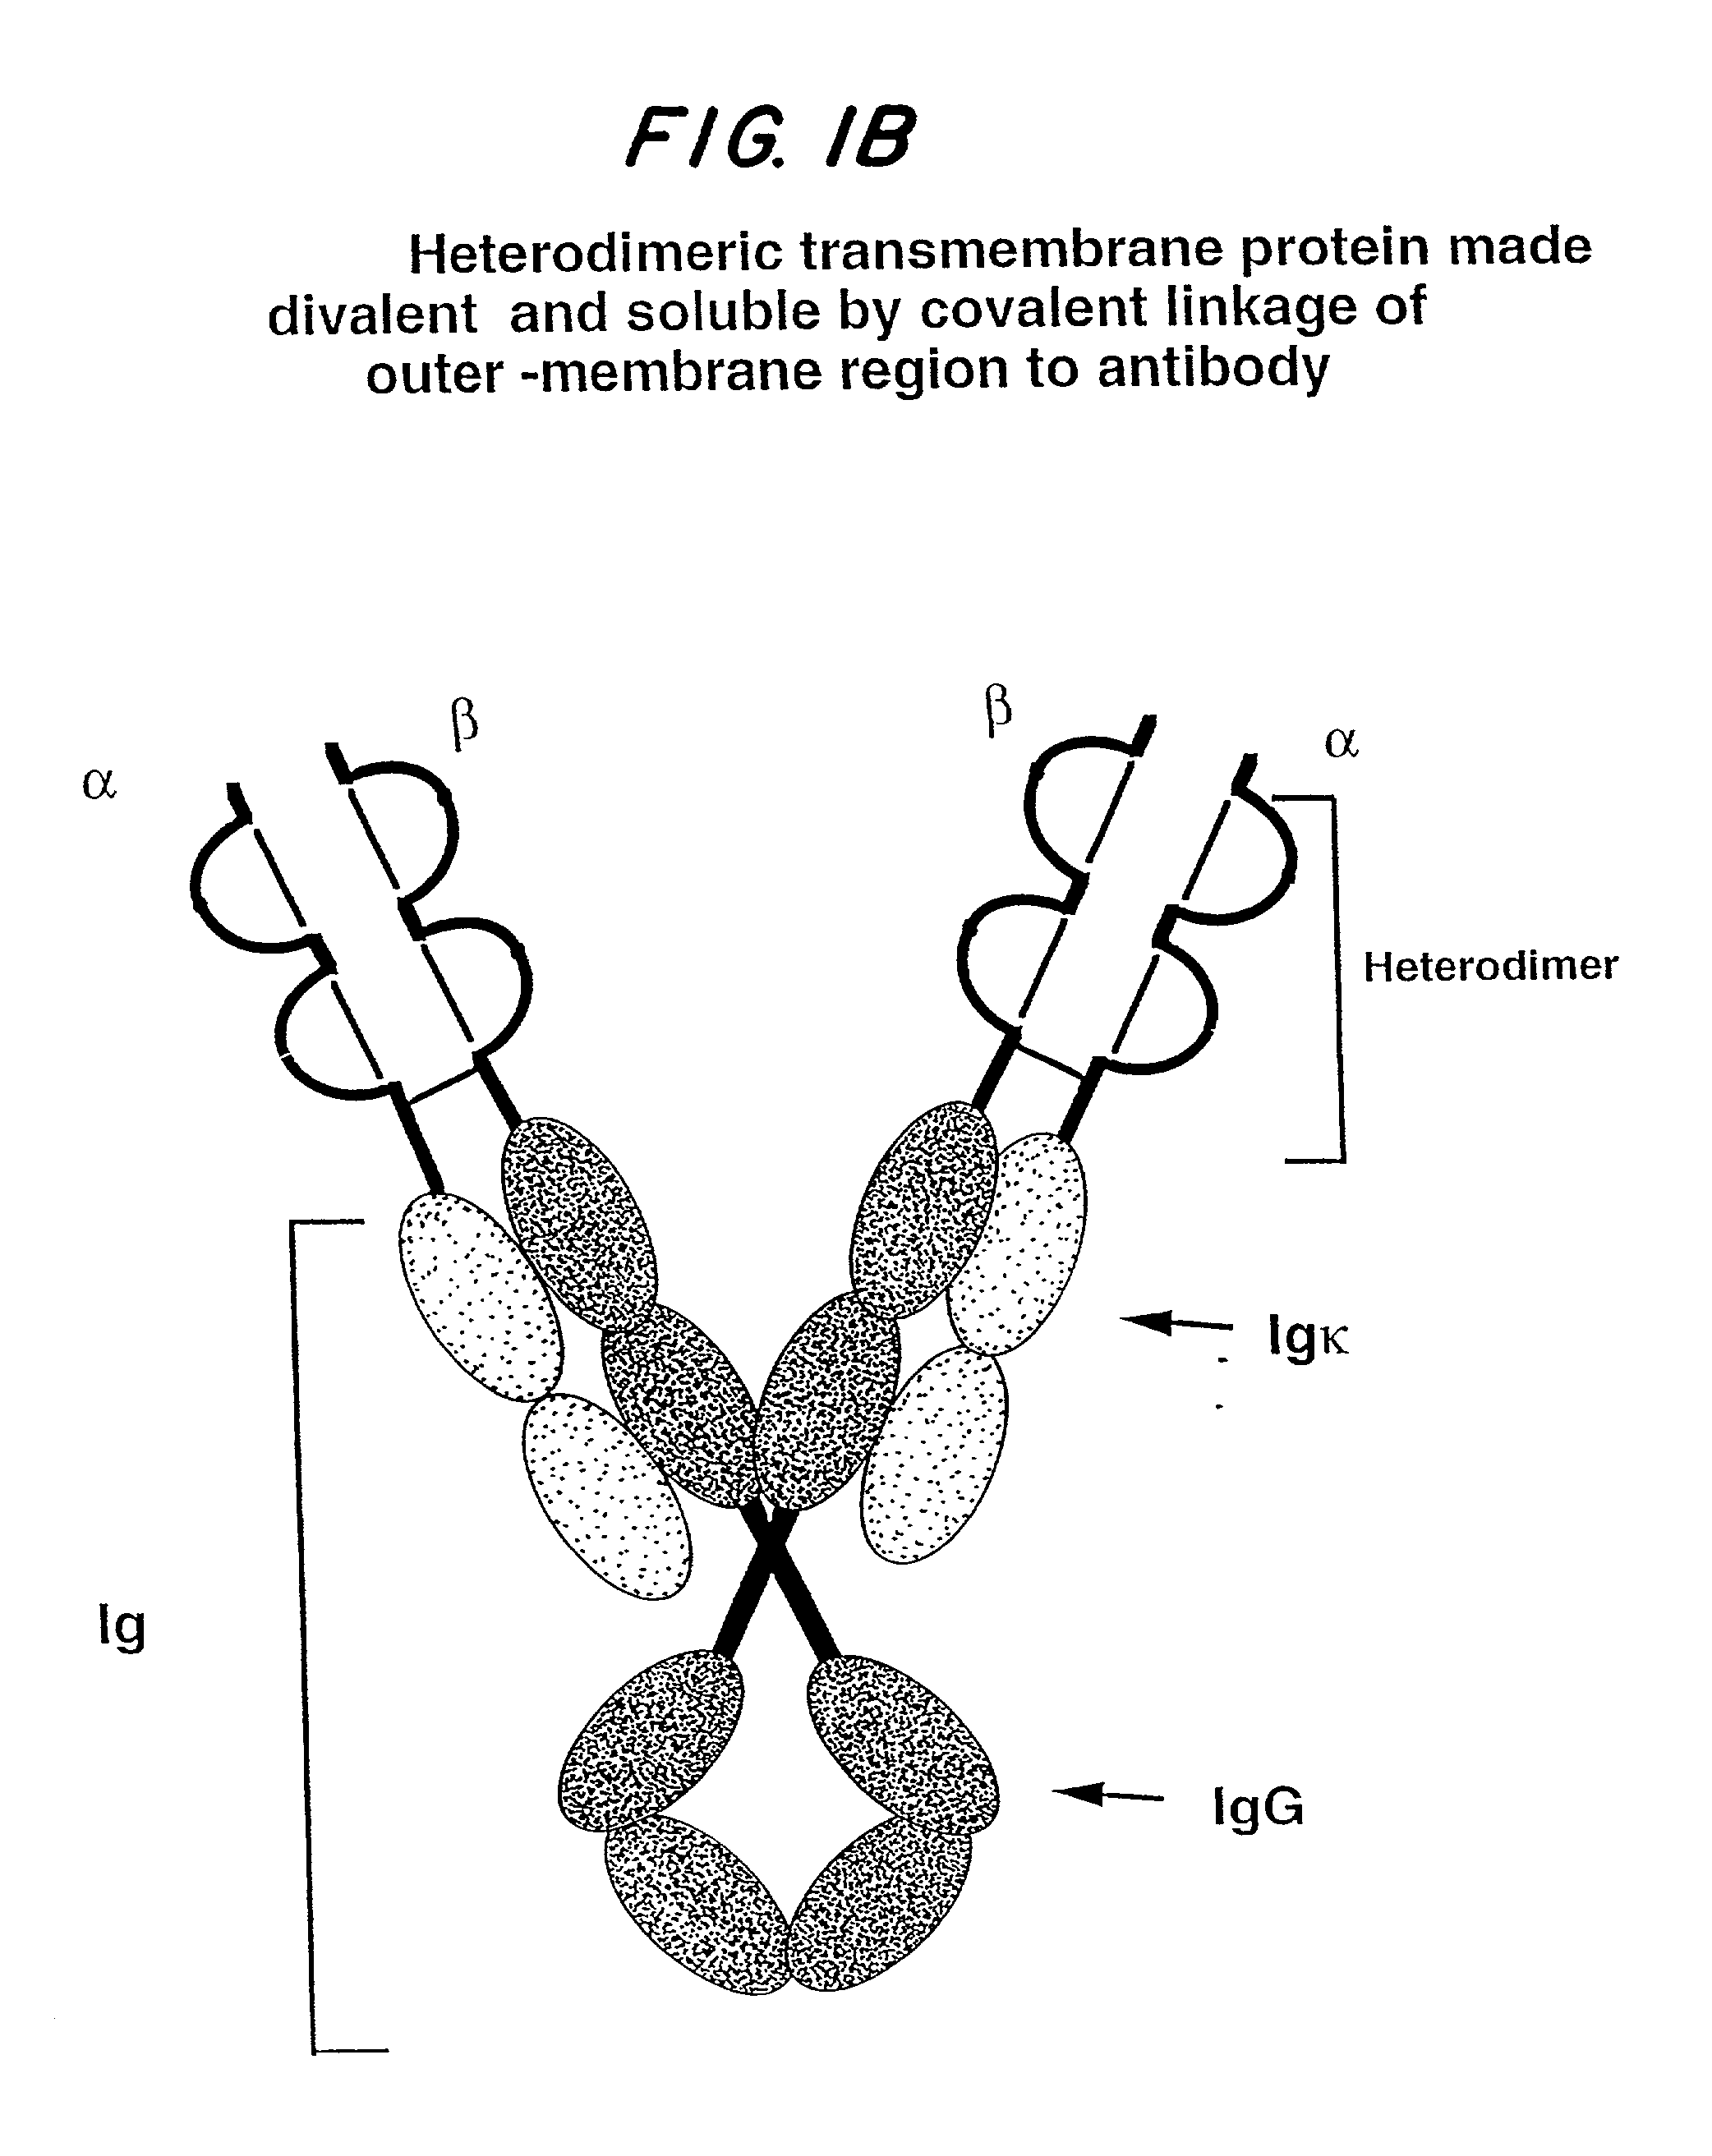 Soluble divalent and multivalent heterodimeric analogs of proteins